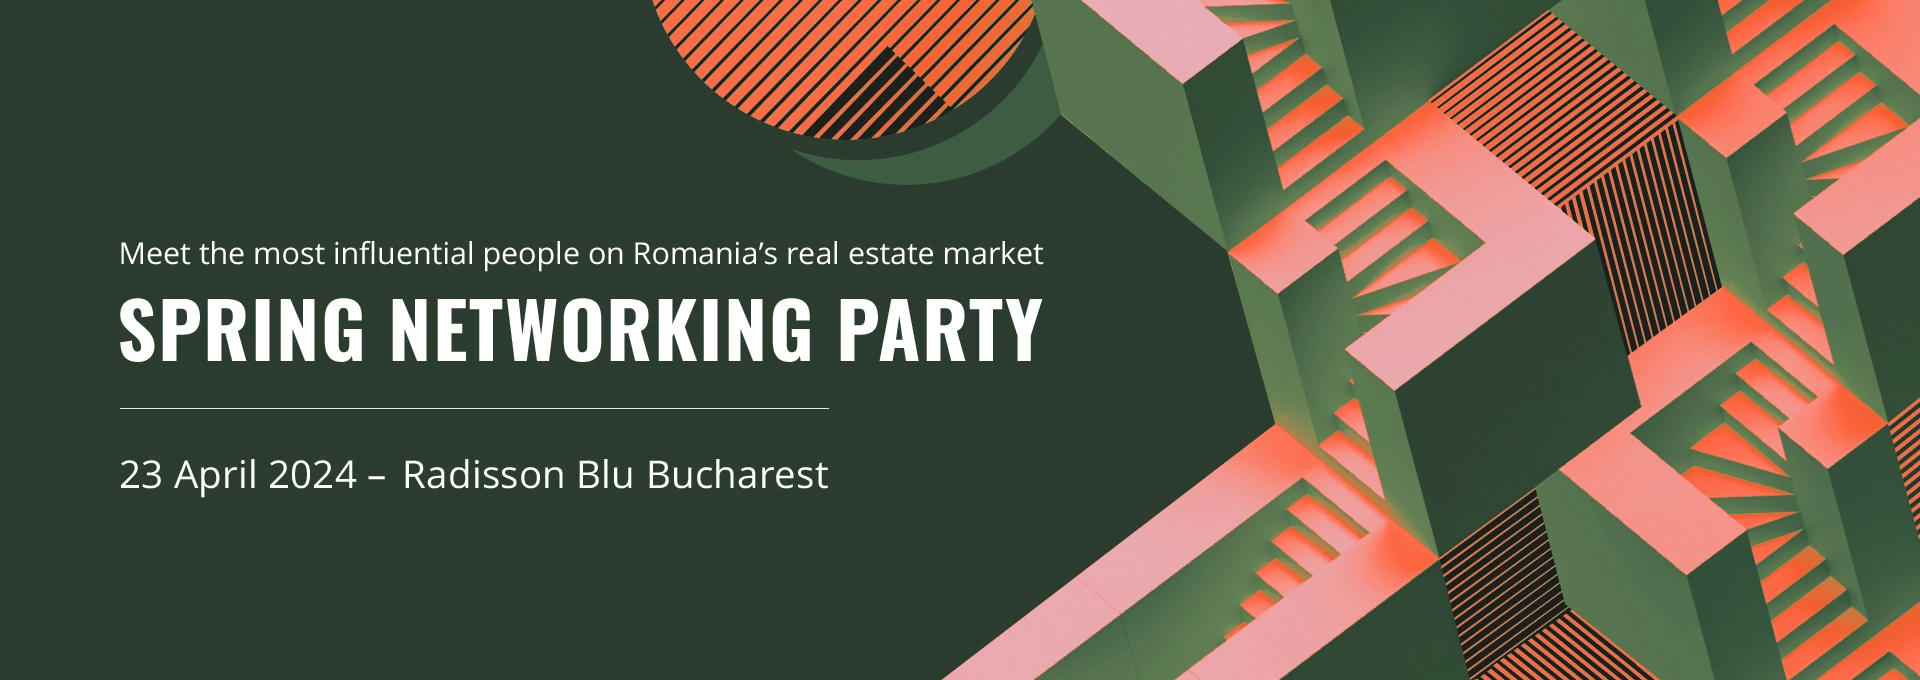 SPRING NETWORKING PARTY 2024 - Meet the most influential people on Romania’s real estate market